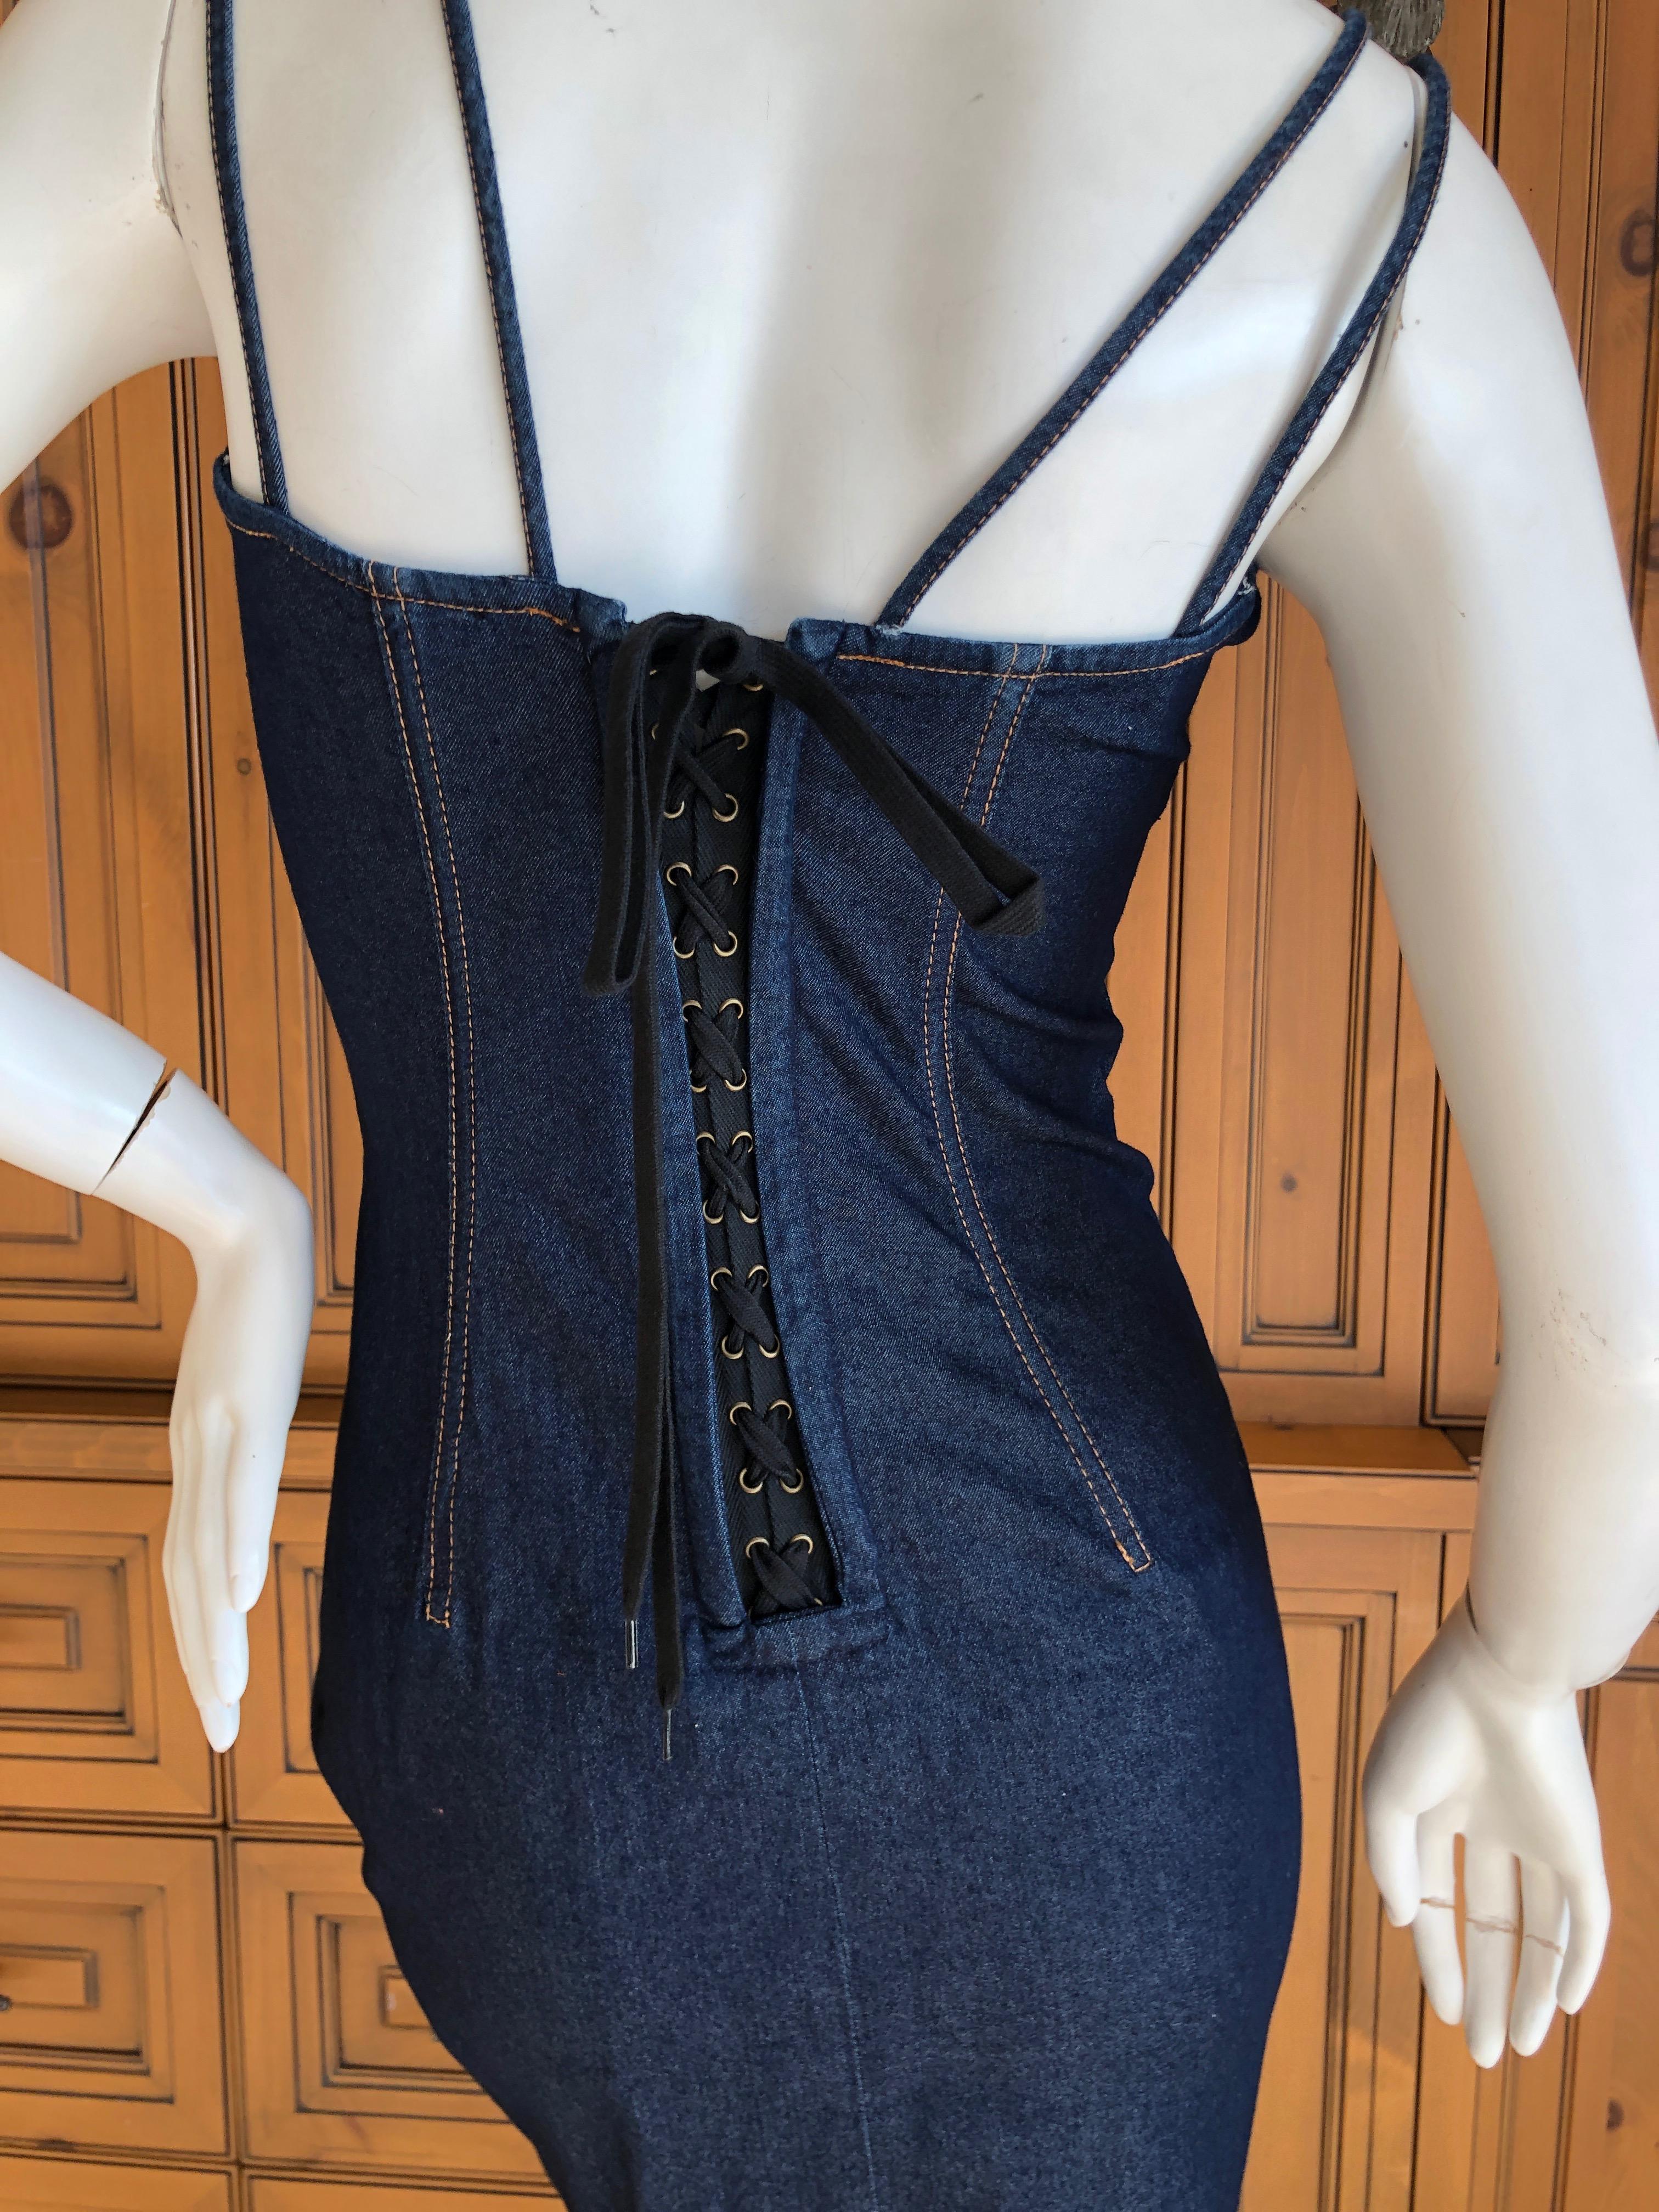 D&G Dolce & Gabbana Vintage Dark Denim Corset Dress with Lace Up Back In Excellent Condition For Sale In Cloverdale, CA